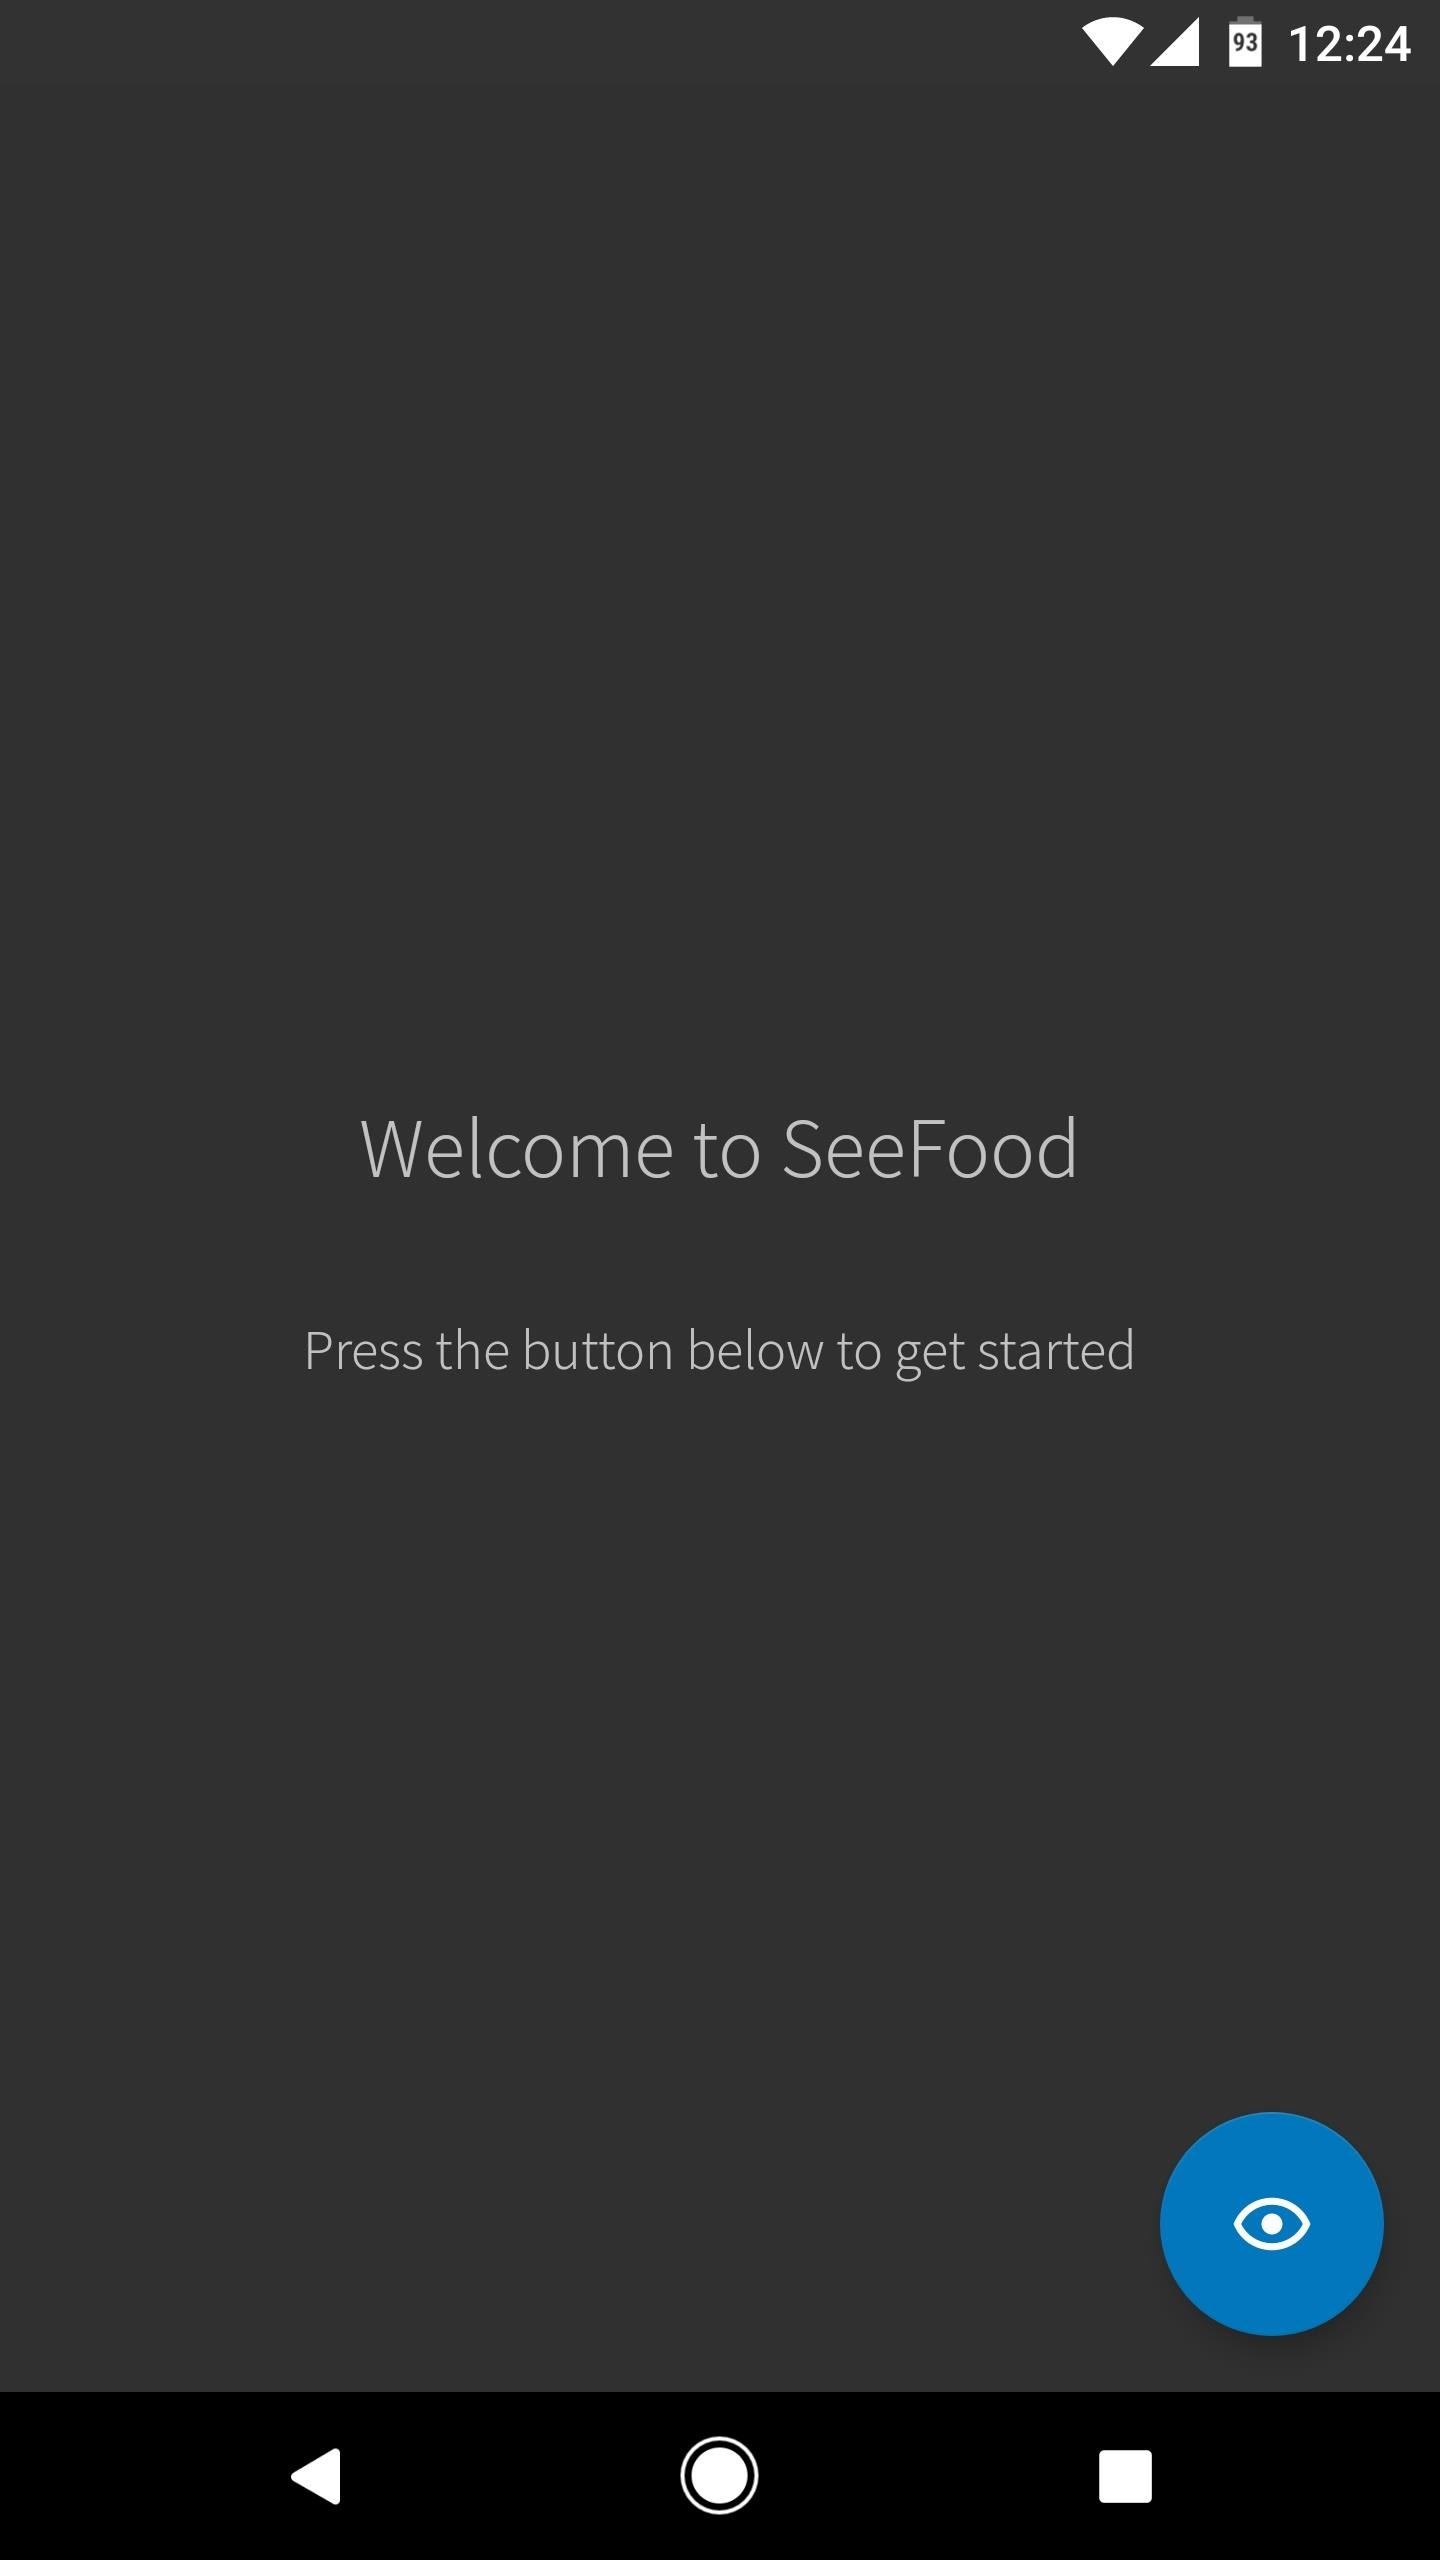 Not Hotdog: Try the Silicon Valley SeeFood App on Android